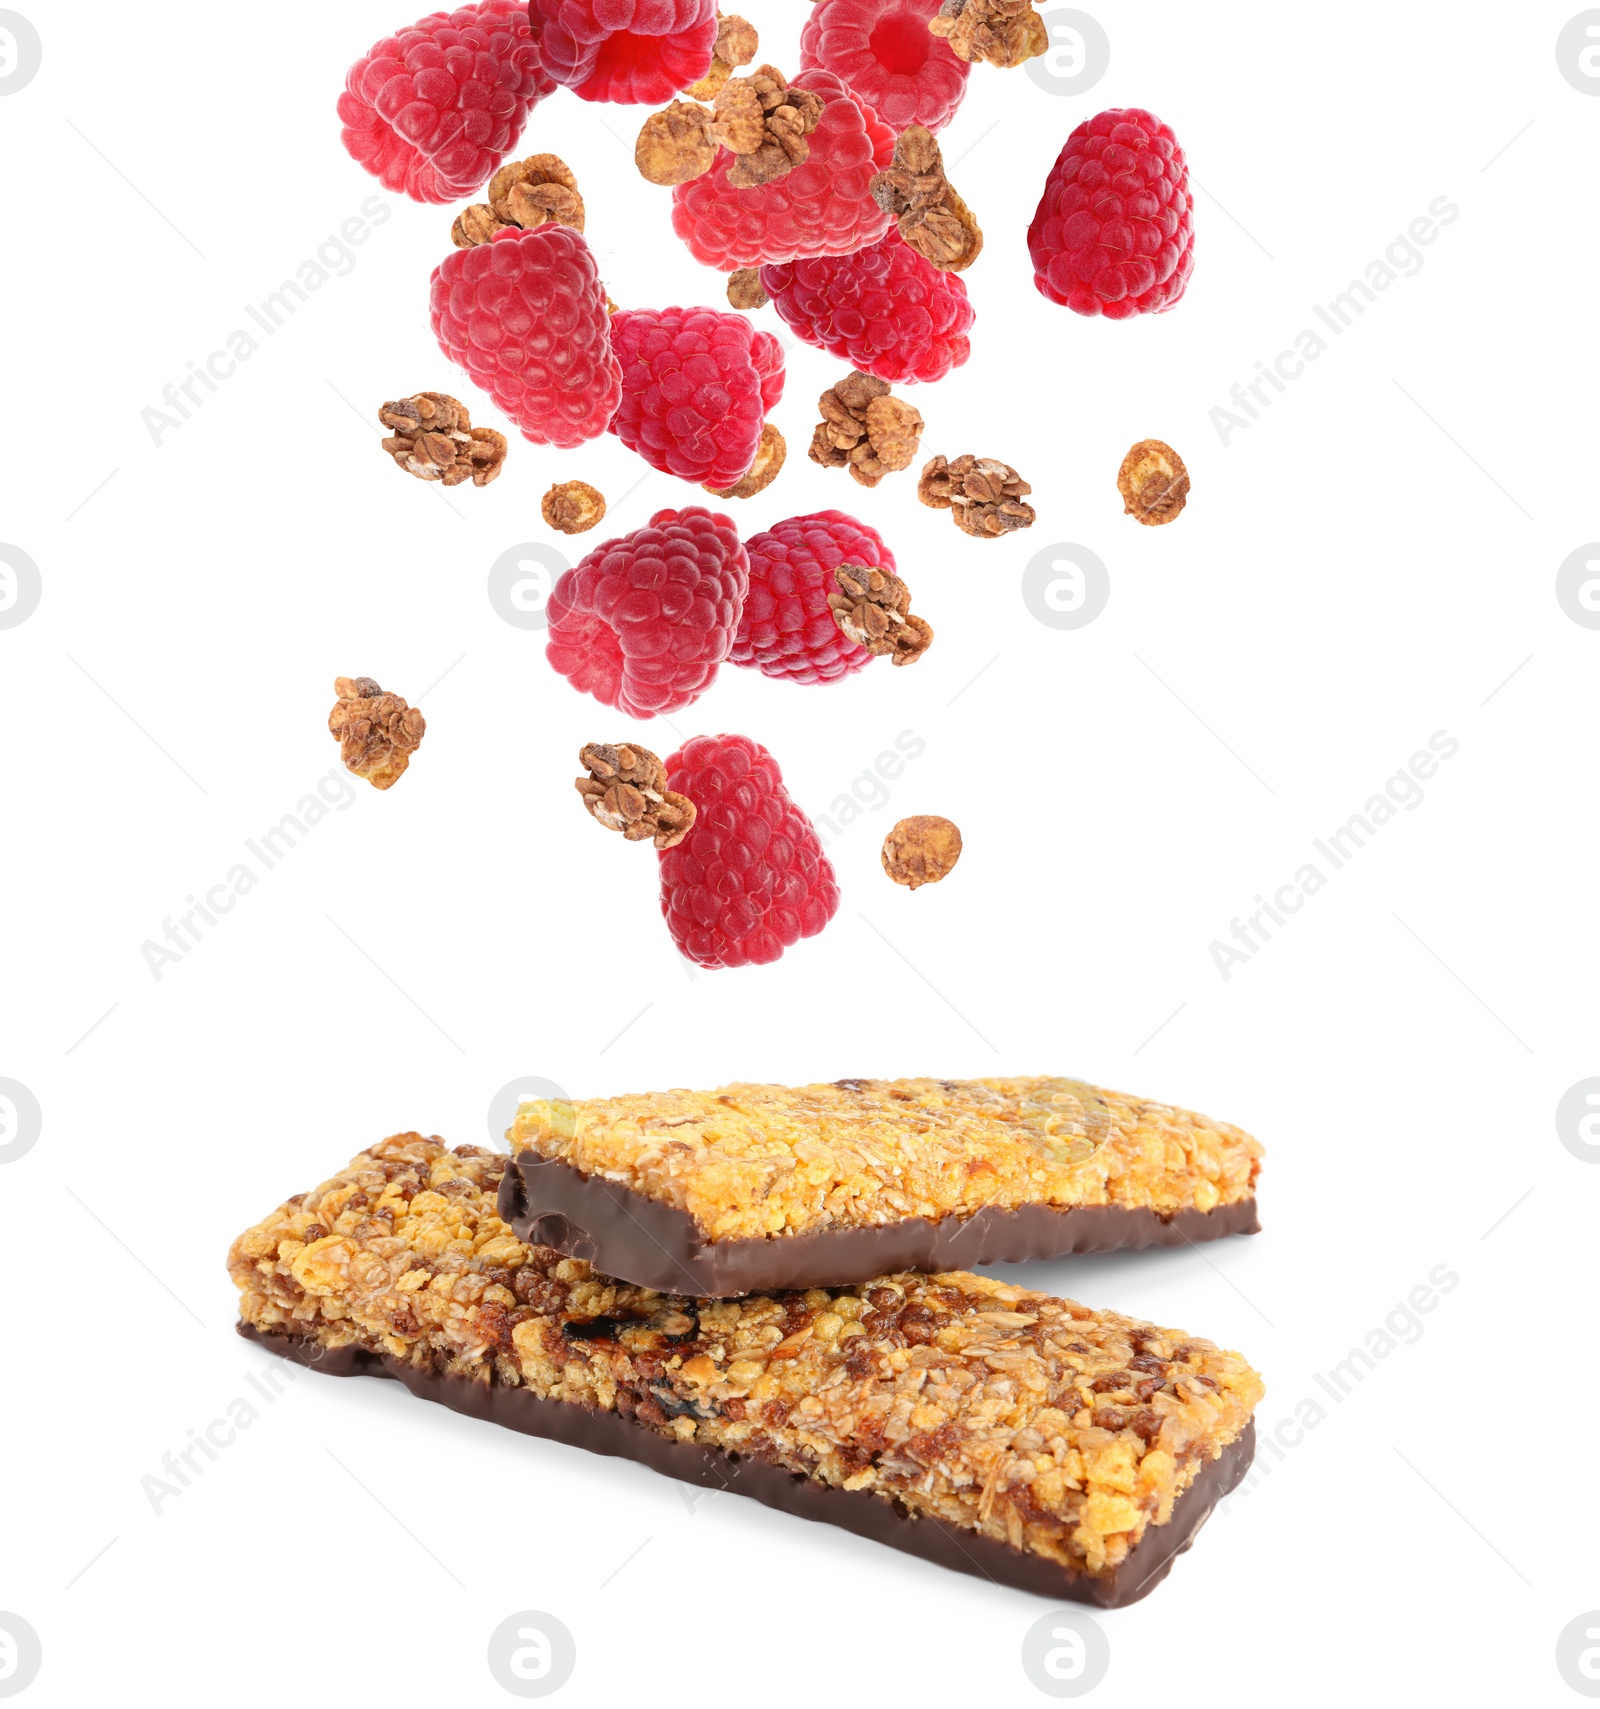 Image of Tasty protein bars and granola with raspberries falling on white background